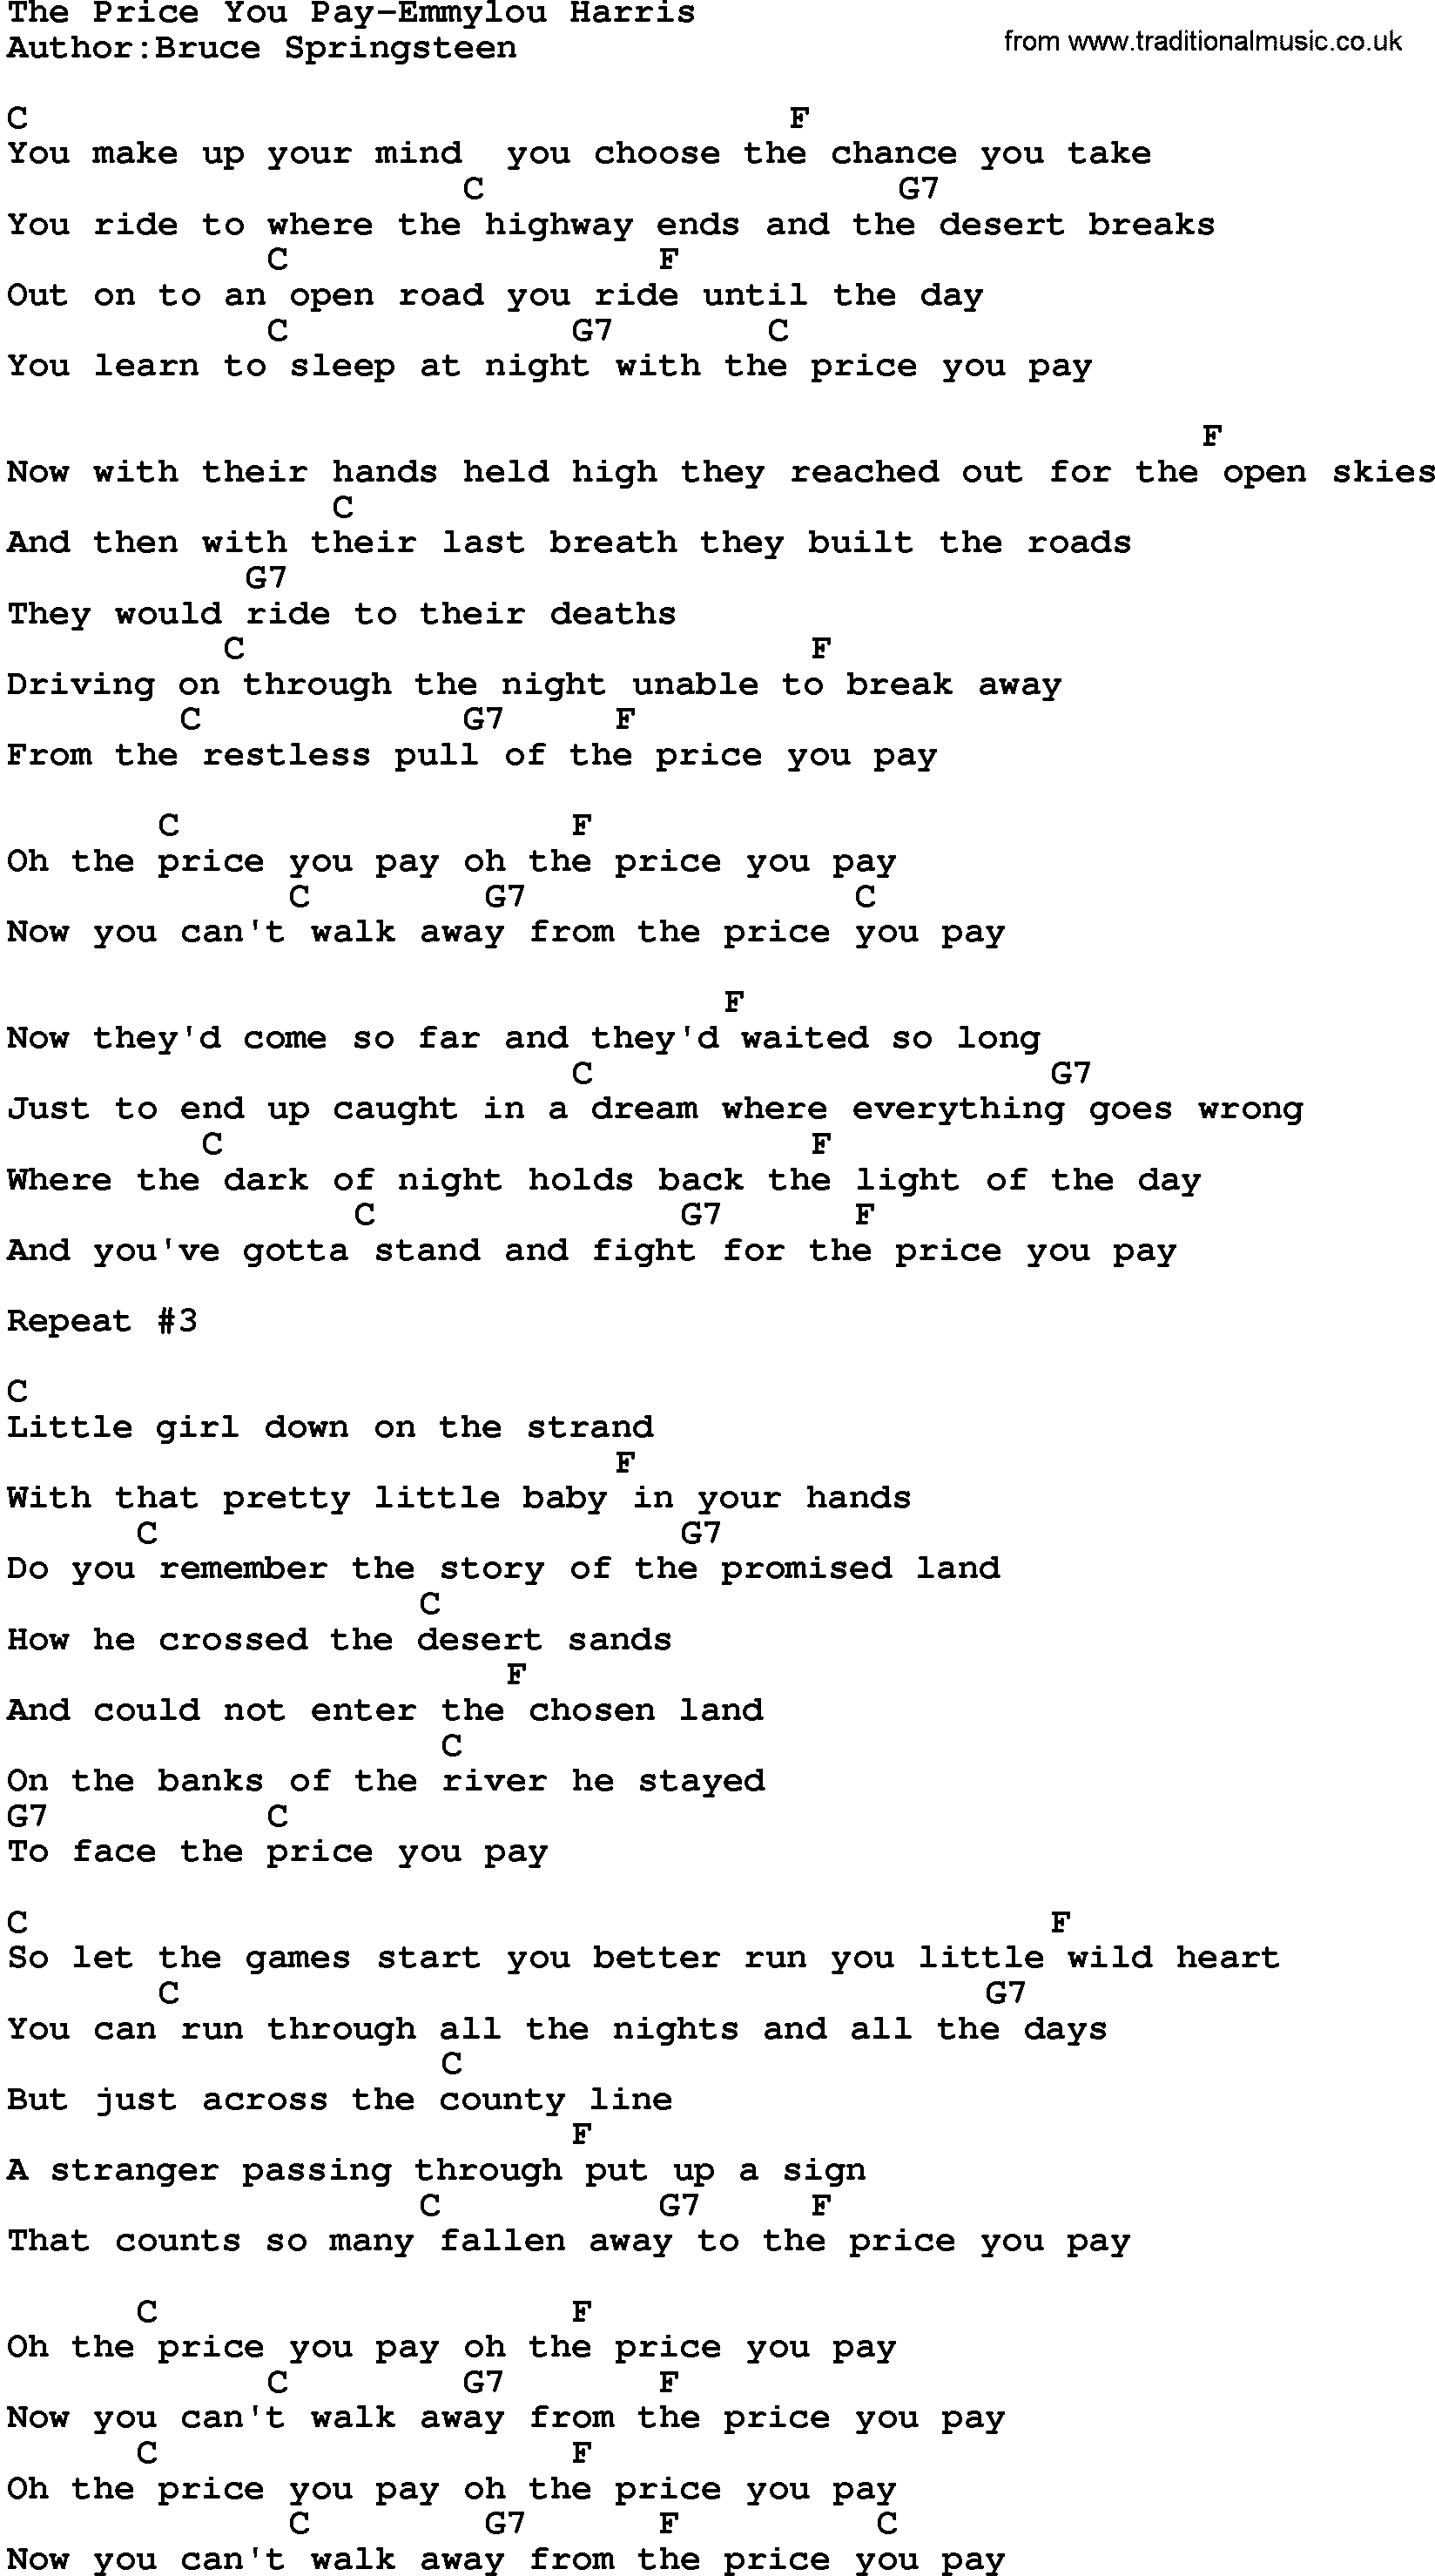 Country music song: The Price You Pay-Emmylou Harris lyrics and chords